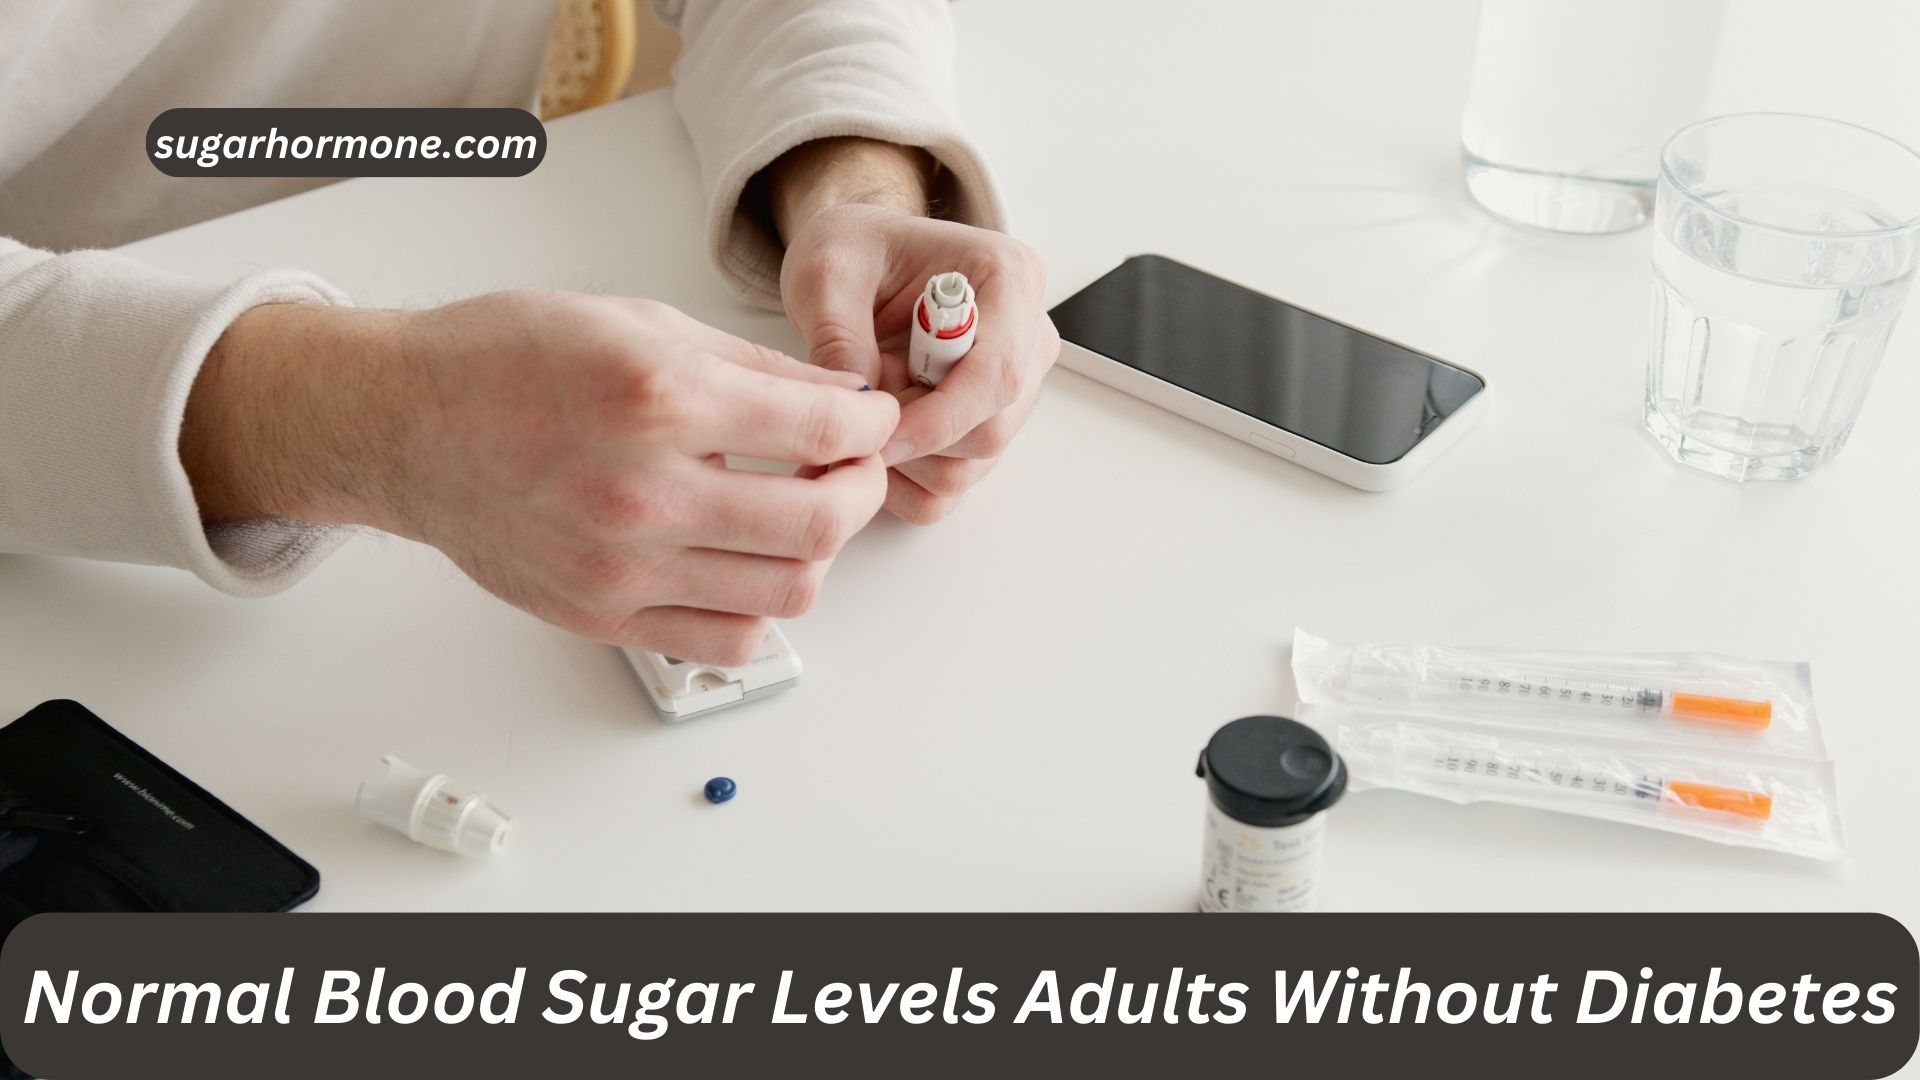 Normal Blood Sugar Levels Adults Without Diabetes